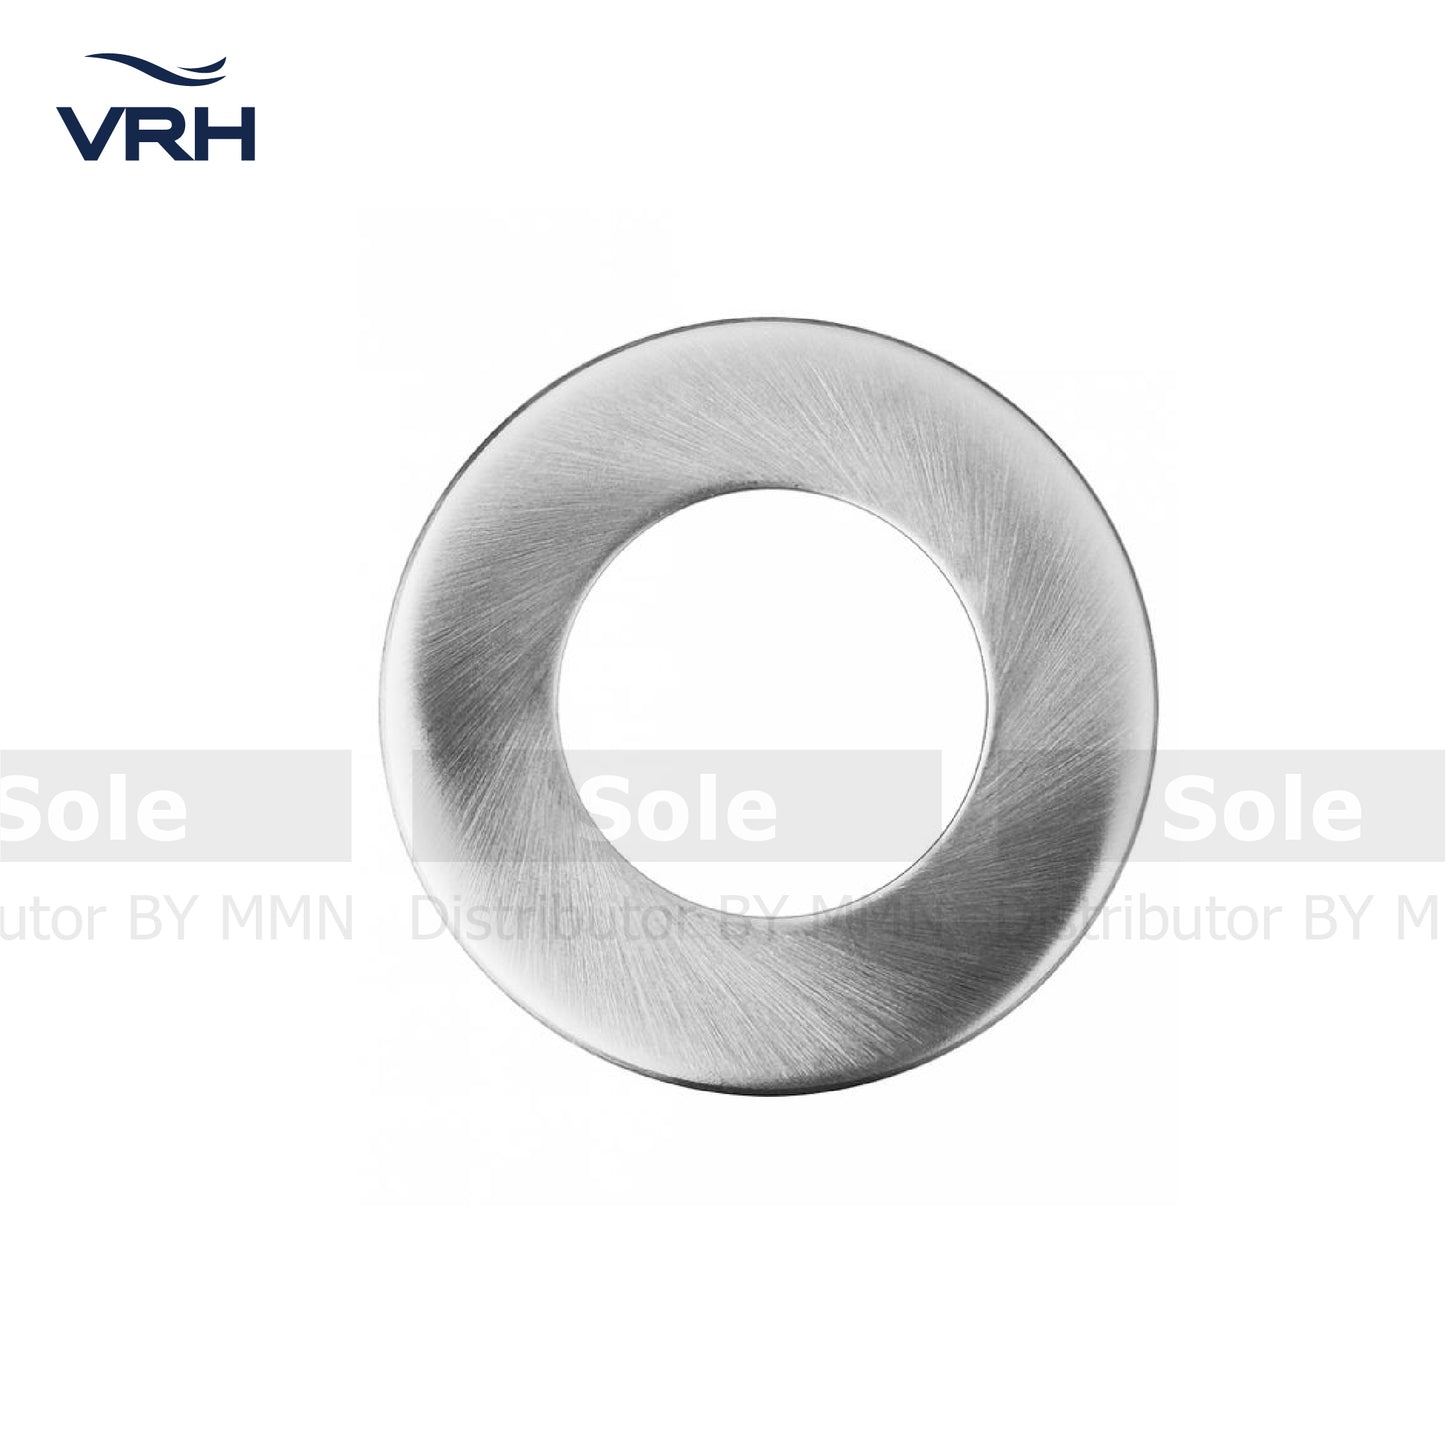 VRH Base Cover For Stop Valve, Stainless Steel- FZVHY.J328AB